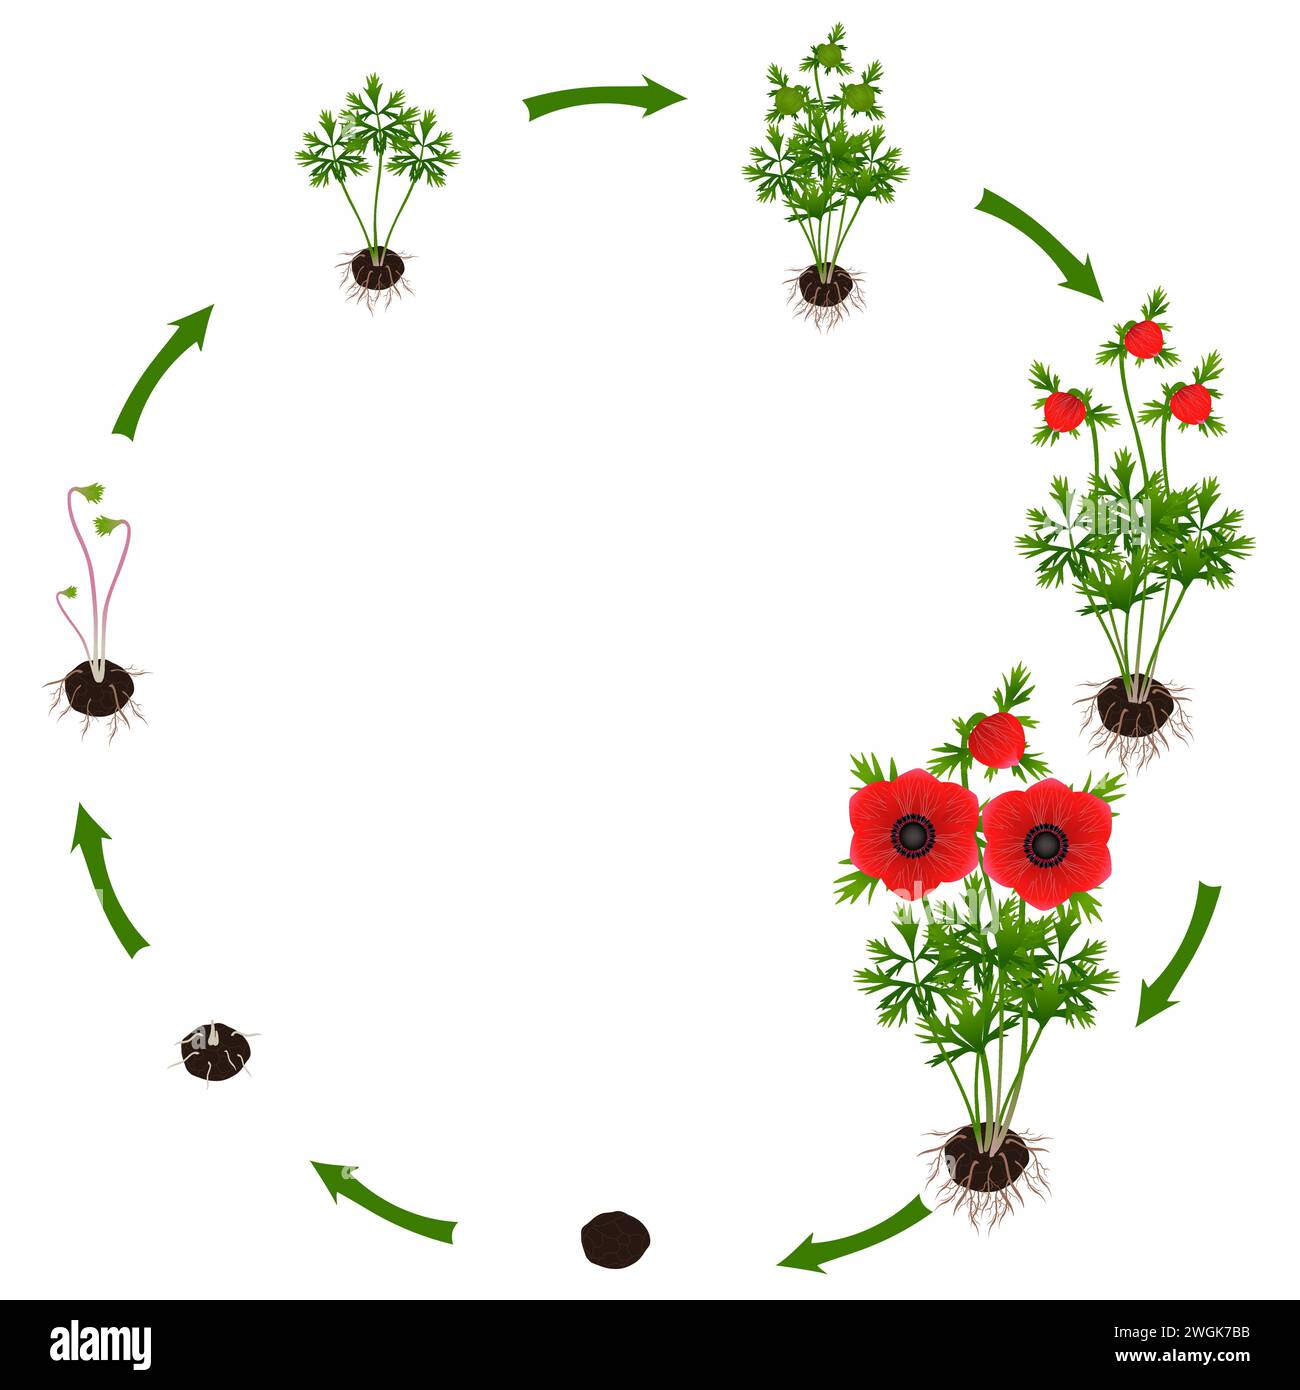 Life cycle of a anemone plant on a white background. Stock Vector